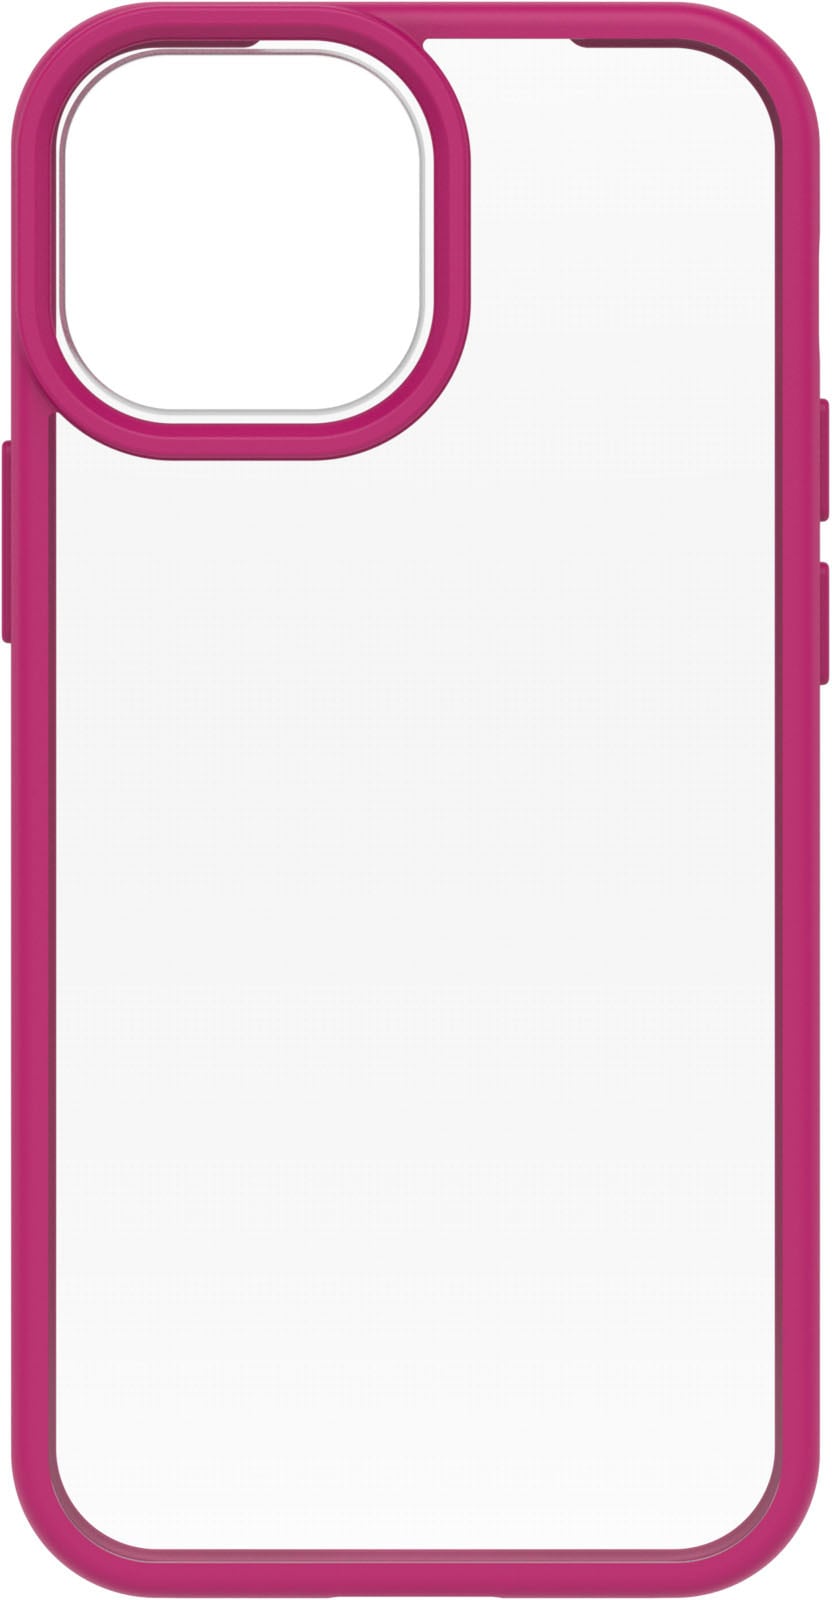 Otterbox Smartphone-Hülle »OtterBox React iPhone 13 mini, clear«, IPHONE 6/6S/7/8/SE2020/SE2022